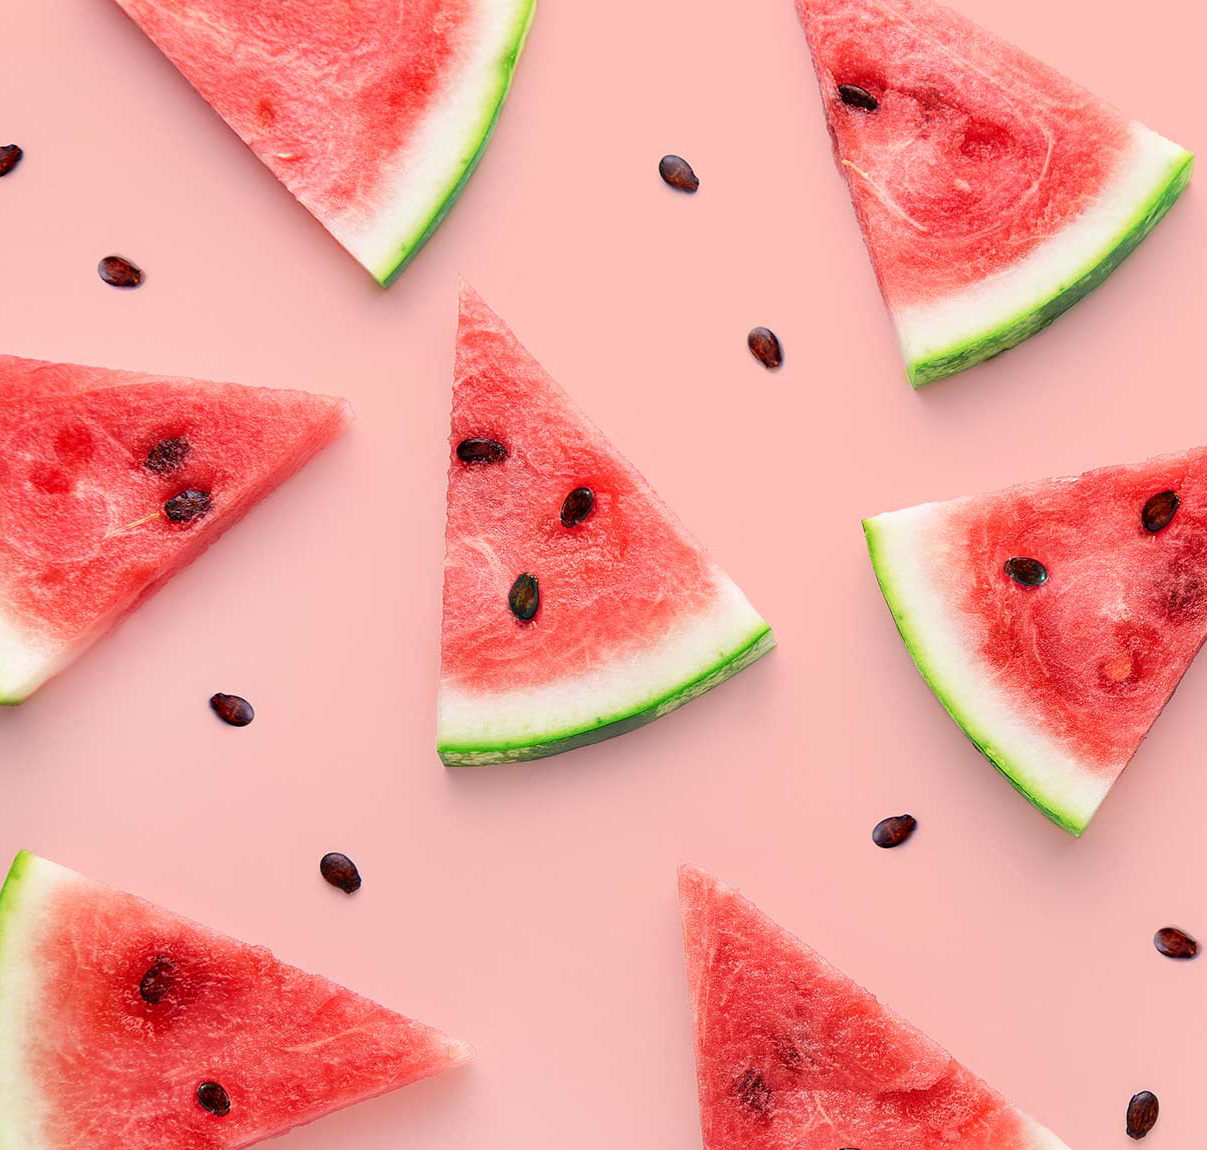 An image of sliced watermelon wedges, scattered with black seeds on a pink background.